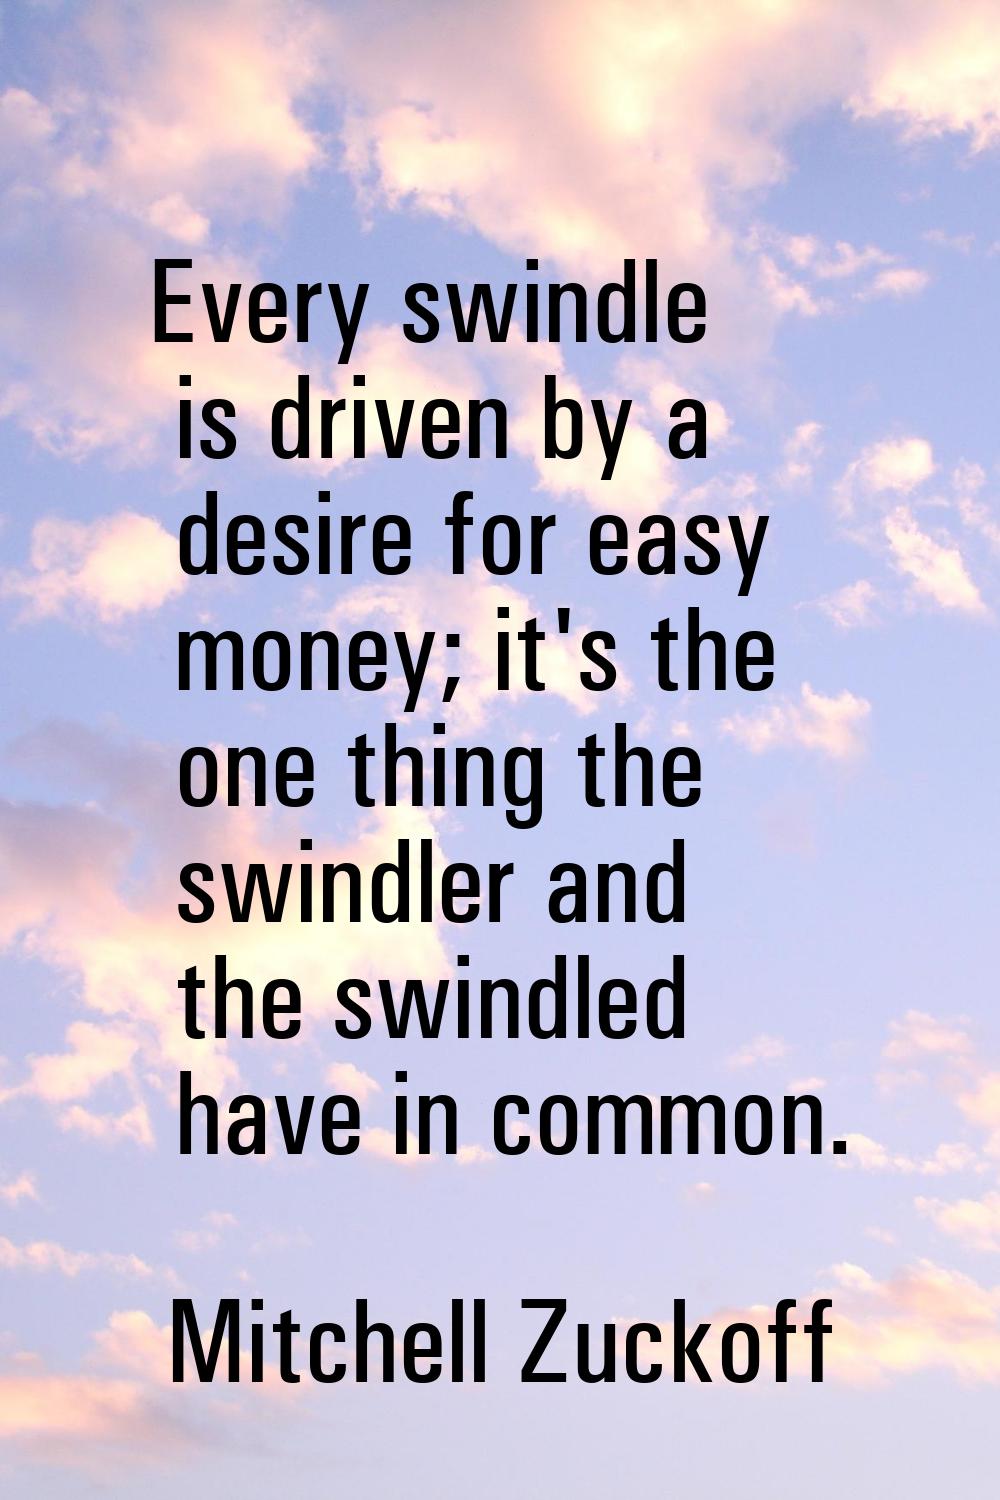 Every swindle is driven by a desire for easy money; it's the one thing the swindler and the swindle